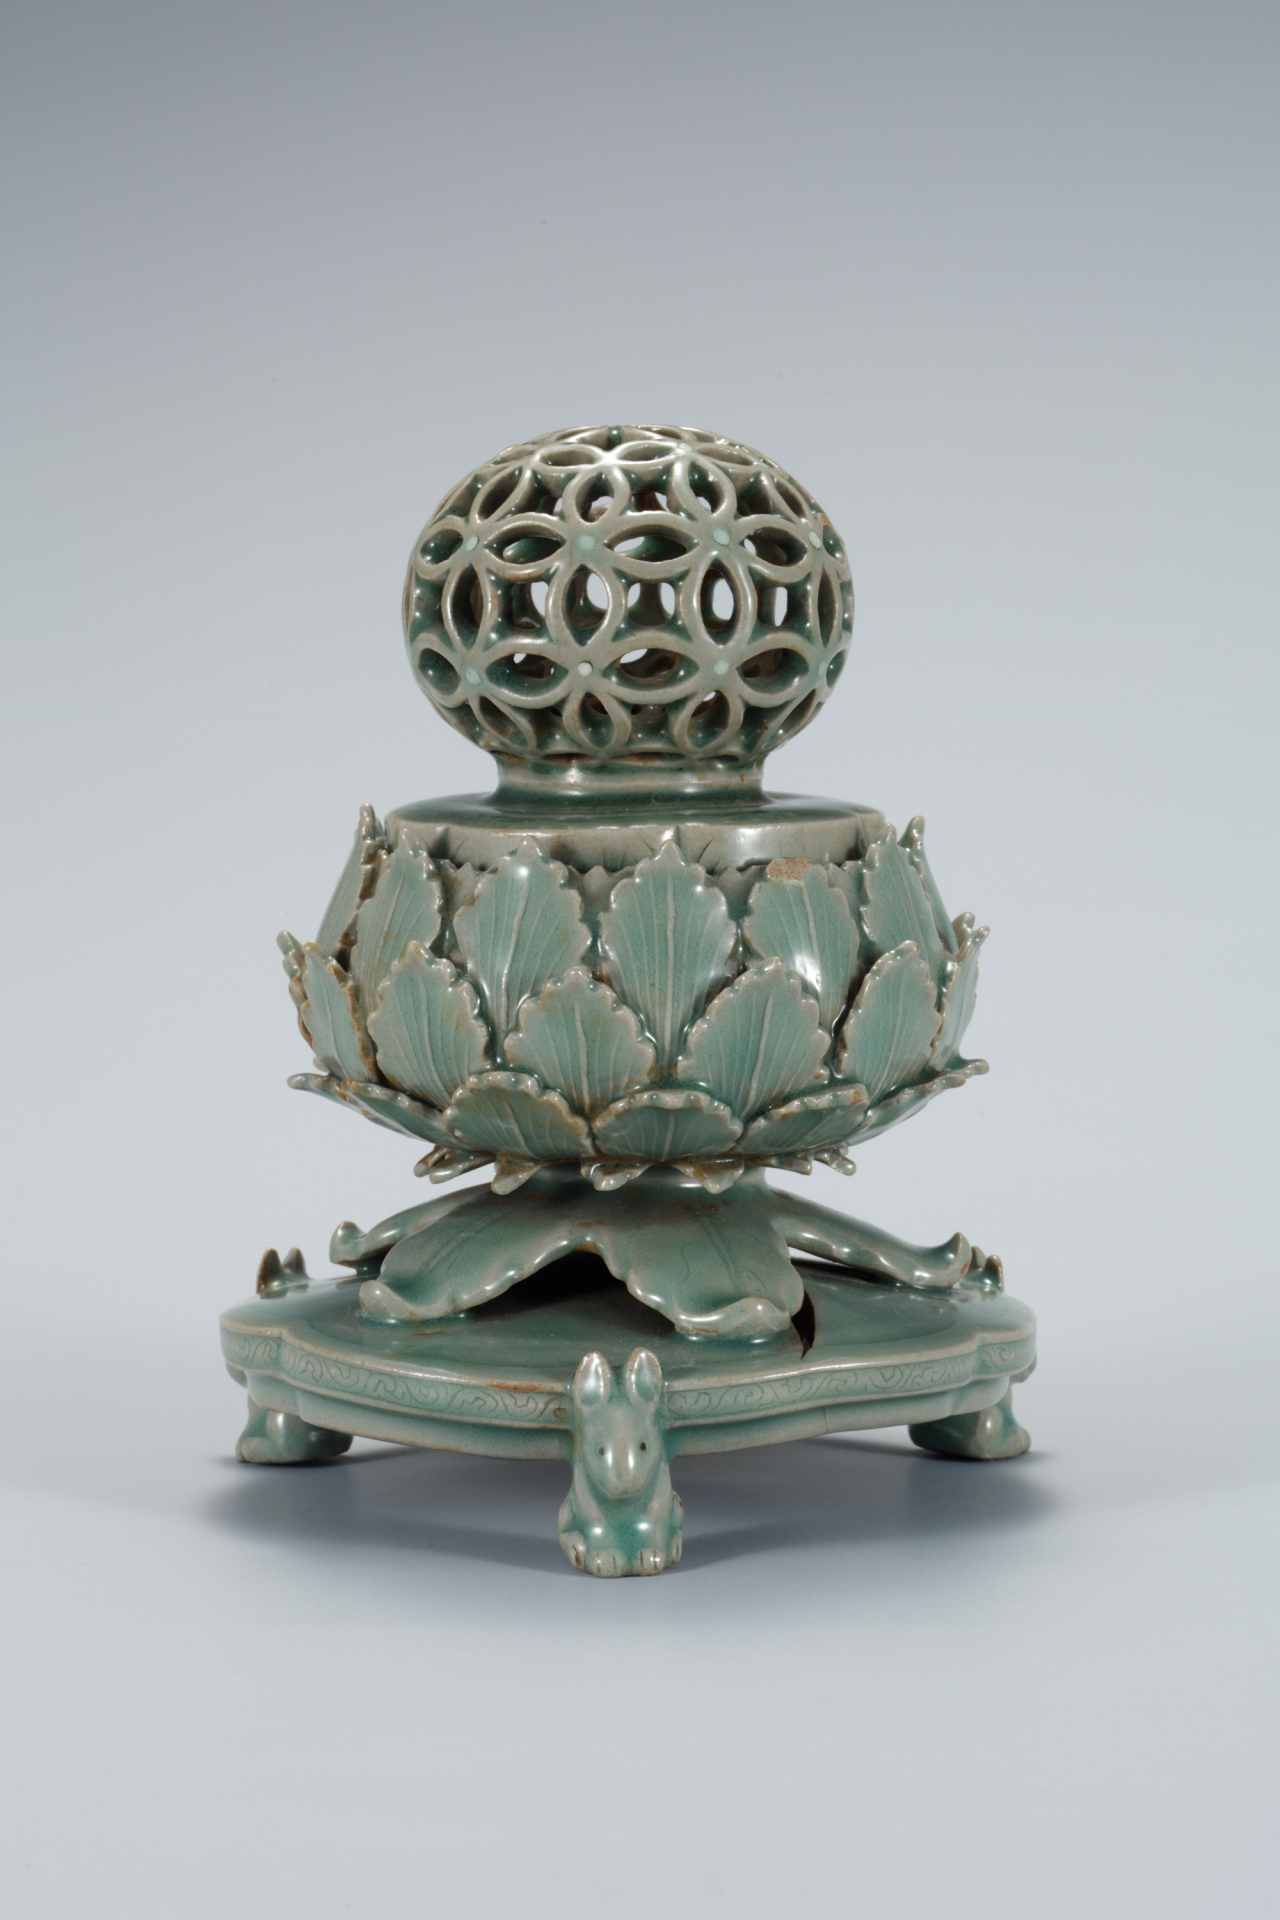 Celadon incense burner with an openwork auspicious character design lid (NMK)